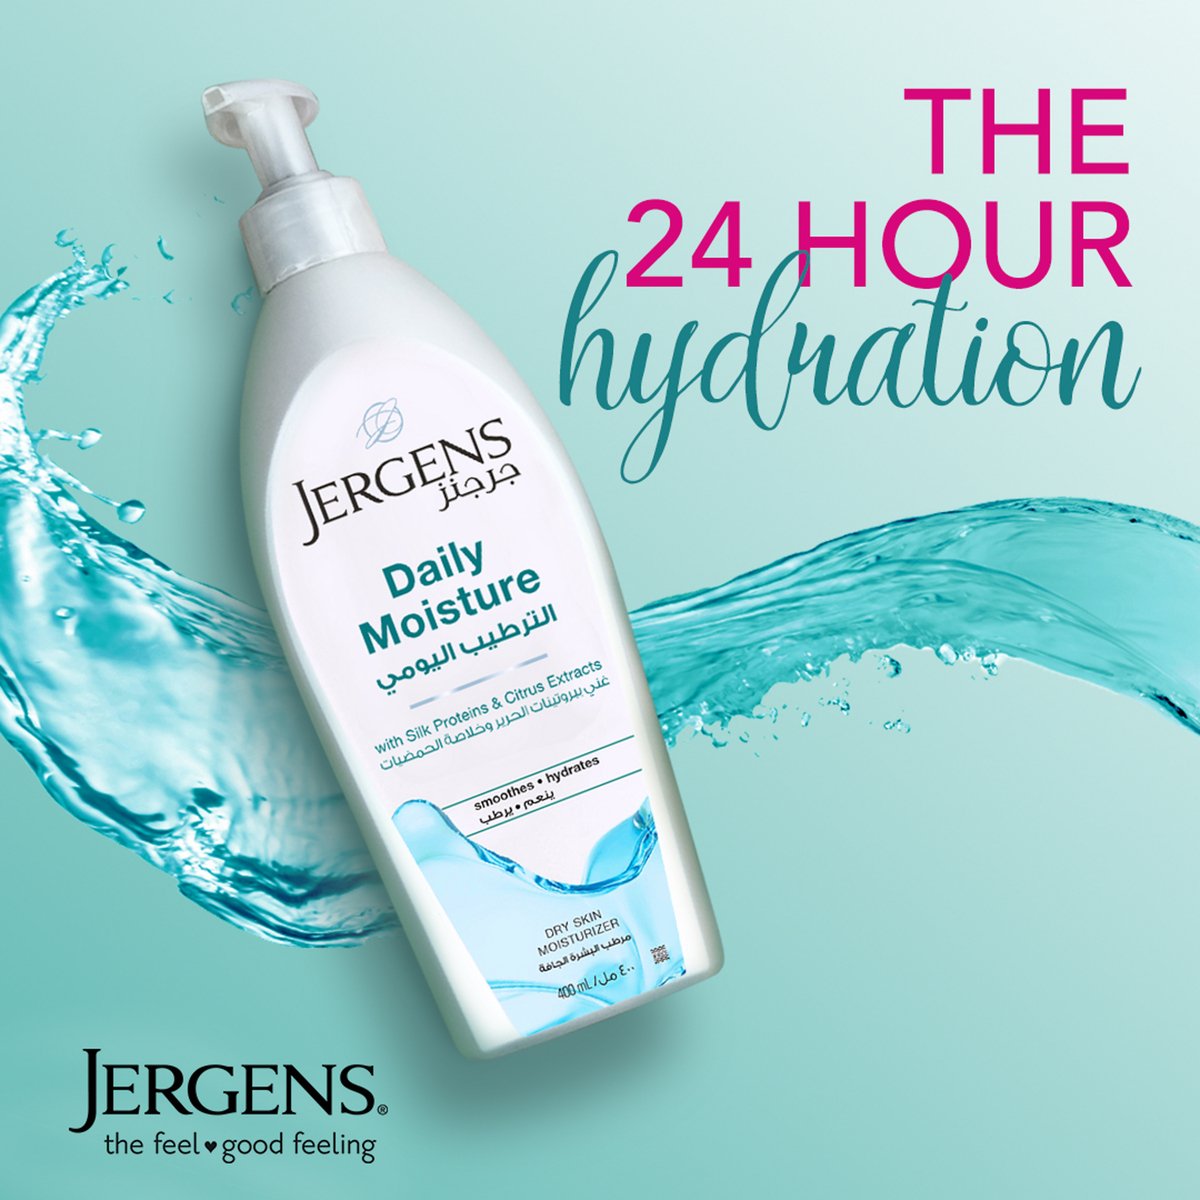 Jergens Daily Moisture Body Lotion 400 ml